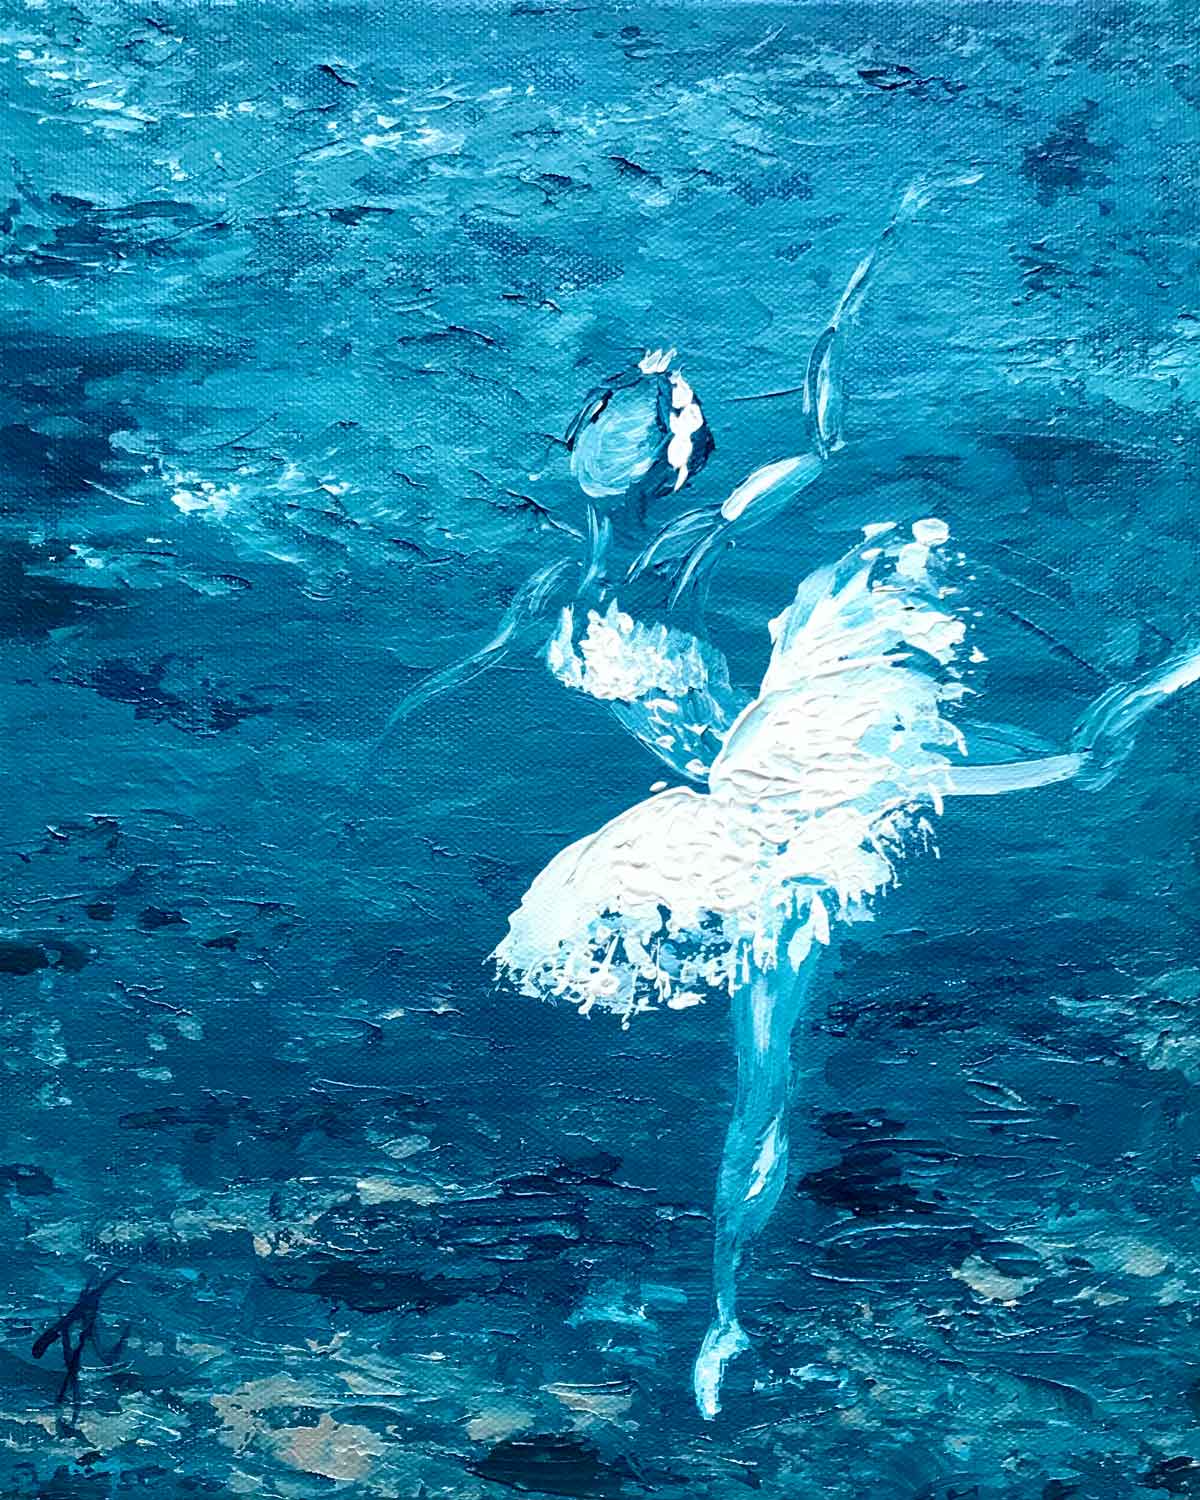 Painting shown cropped to edge: a ballerina in white swan costume poised against a blue background. The brushstrokes are visible, creating a textured surface. The ballerina is poised to the right of the composition.